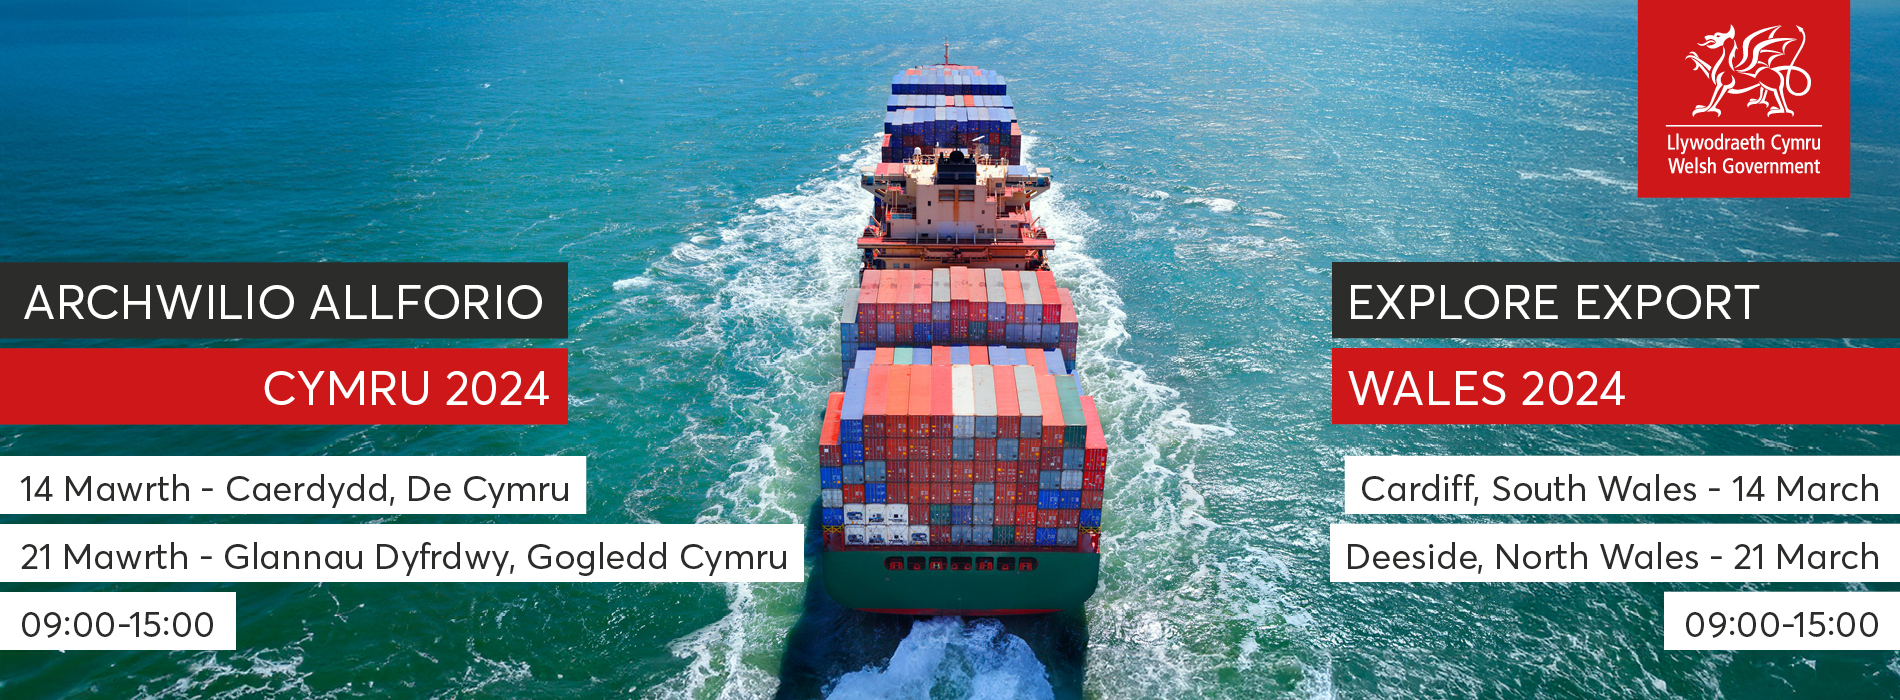 Explore Export Wales home page banner